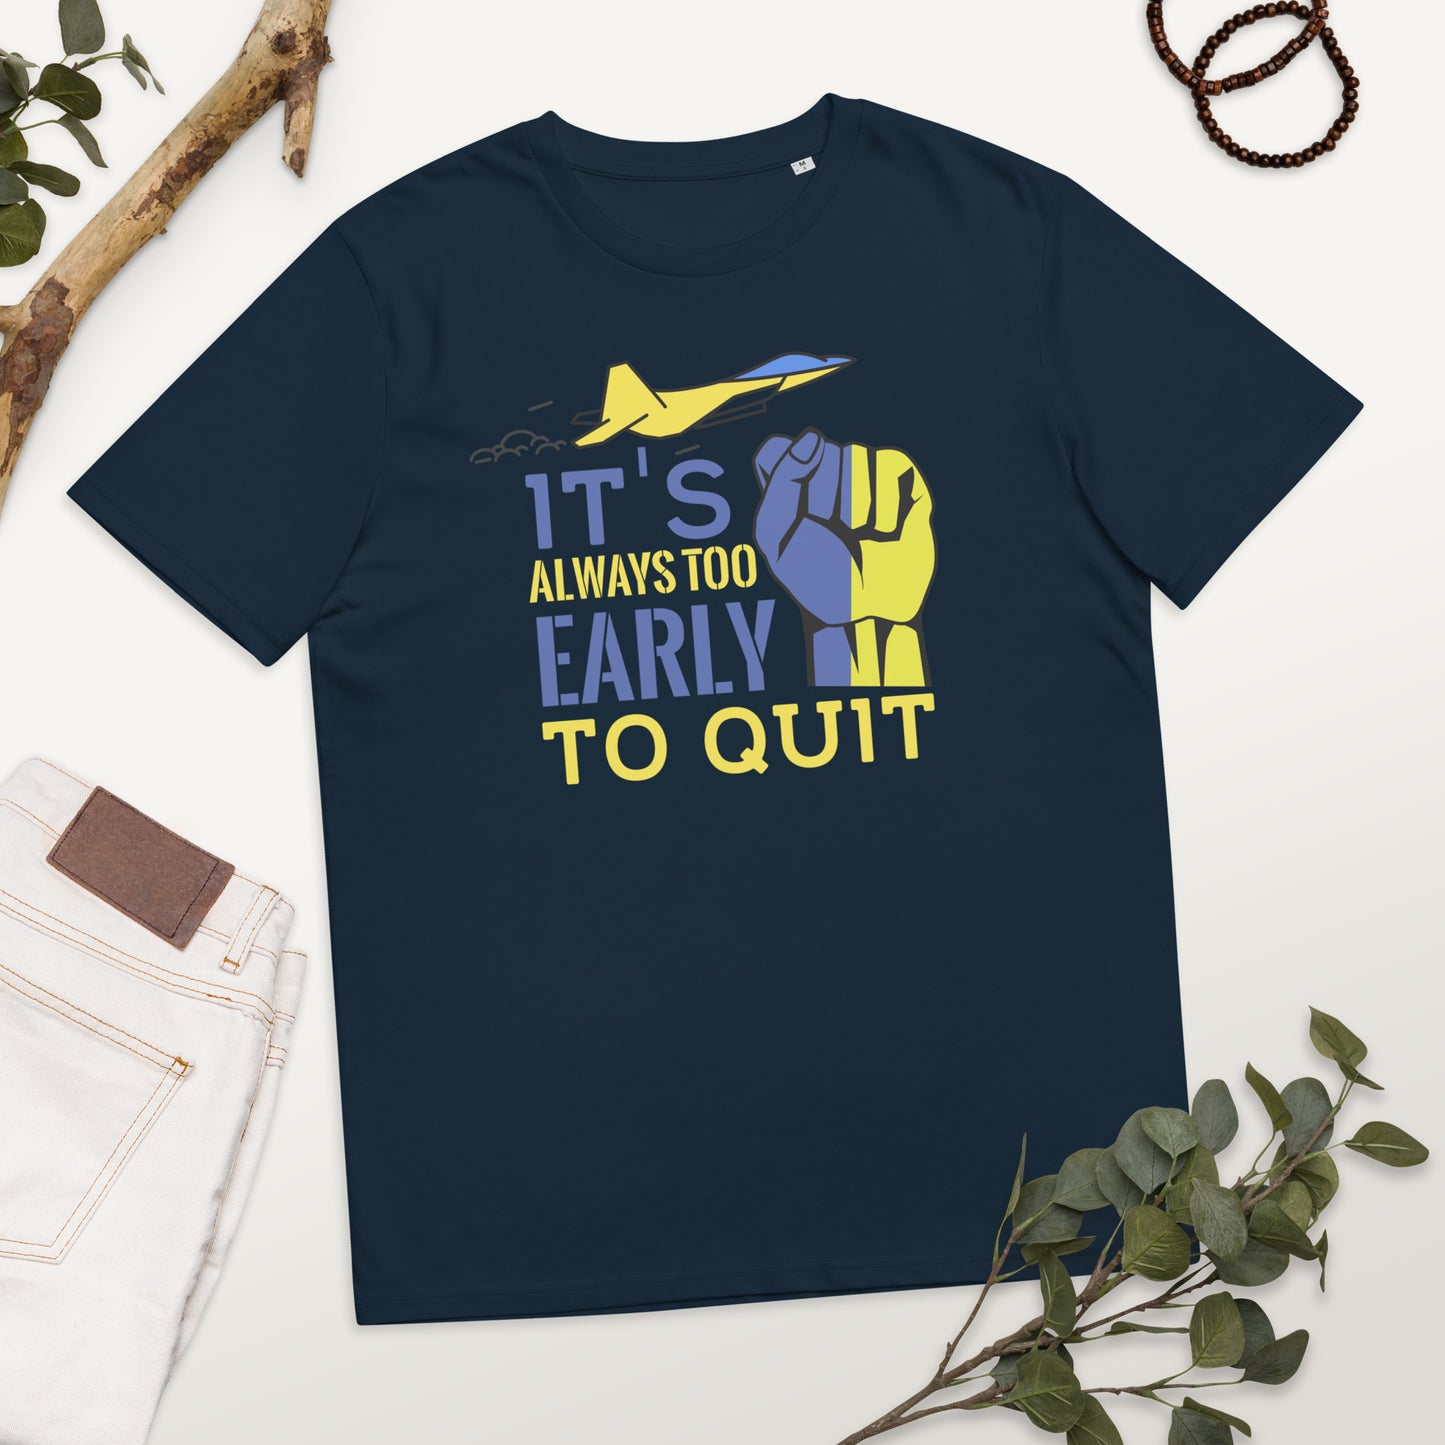 Unisex organic cotton t-shirt | It's Always Too Early To Quit